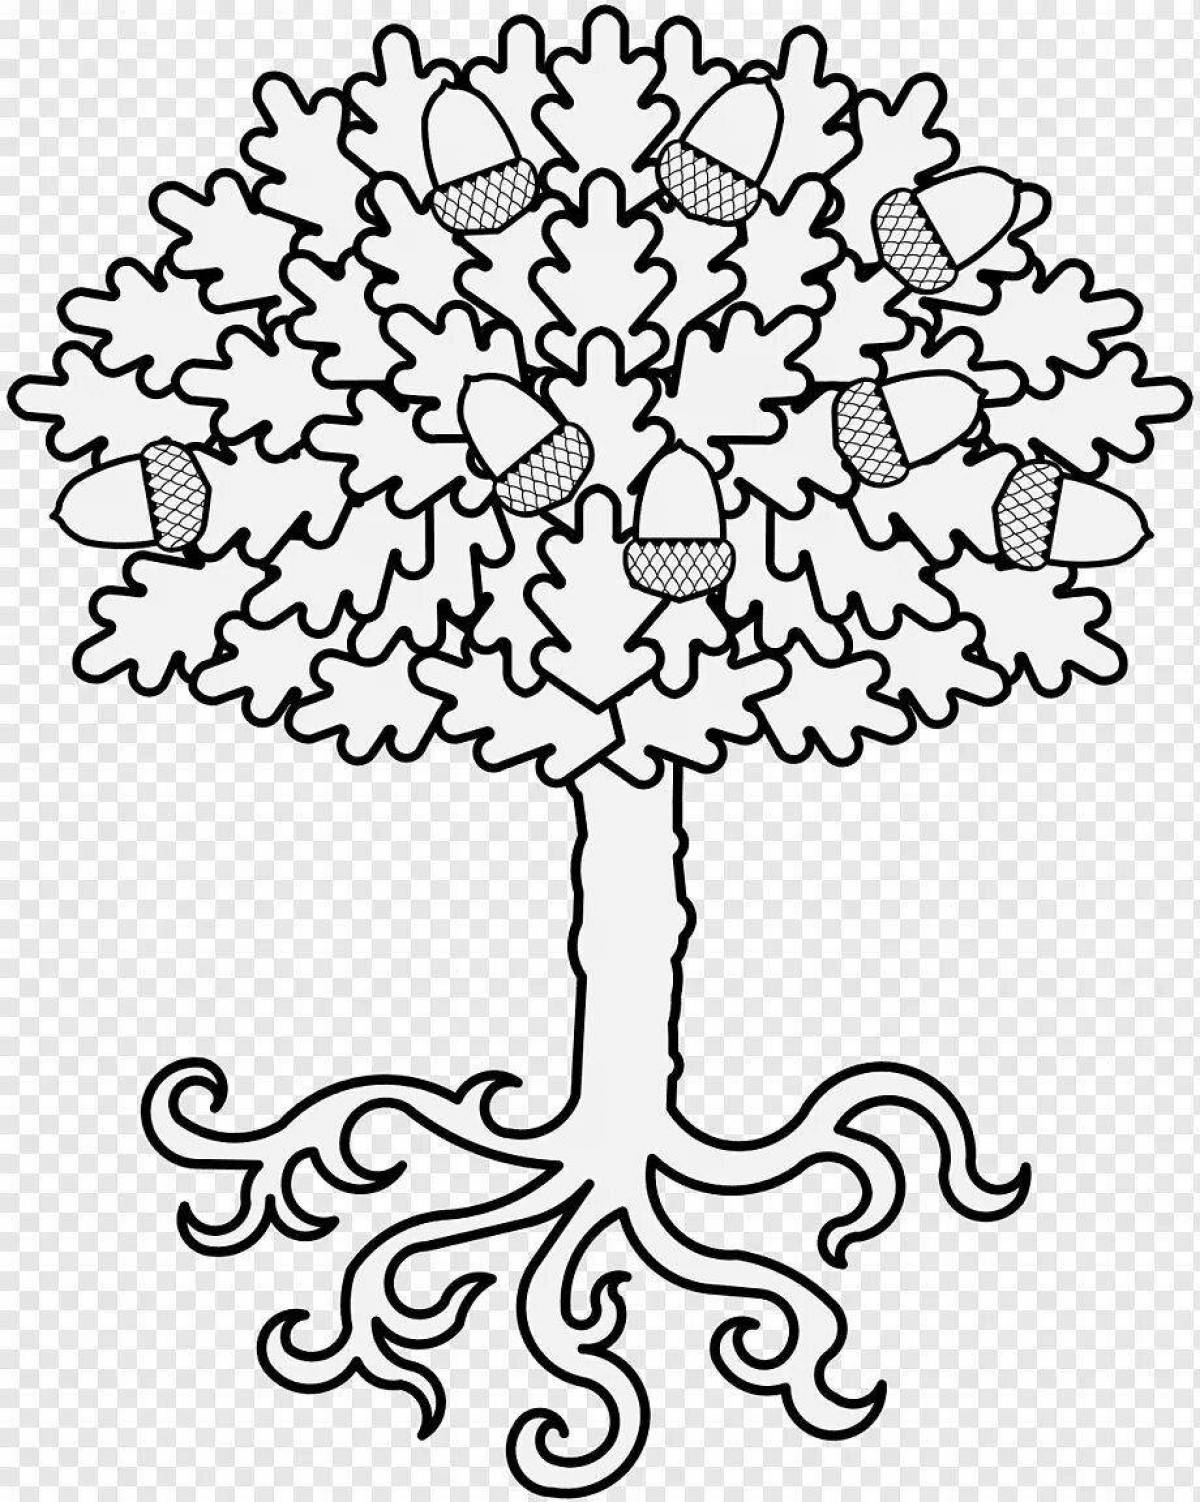 Gorgeous oak tree coloring book for kids